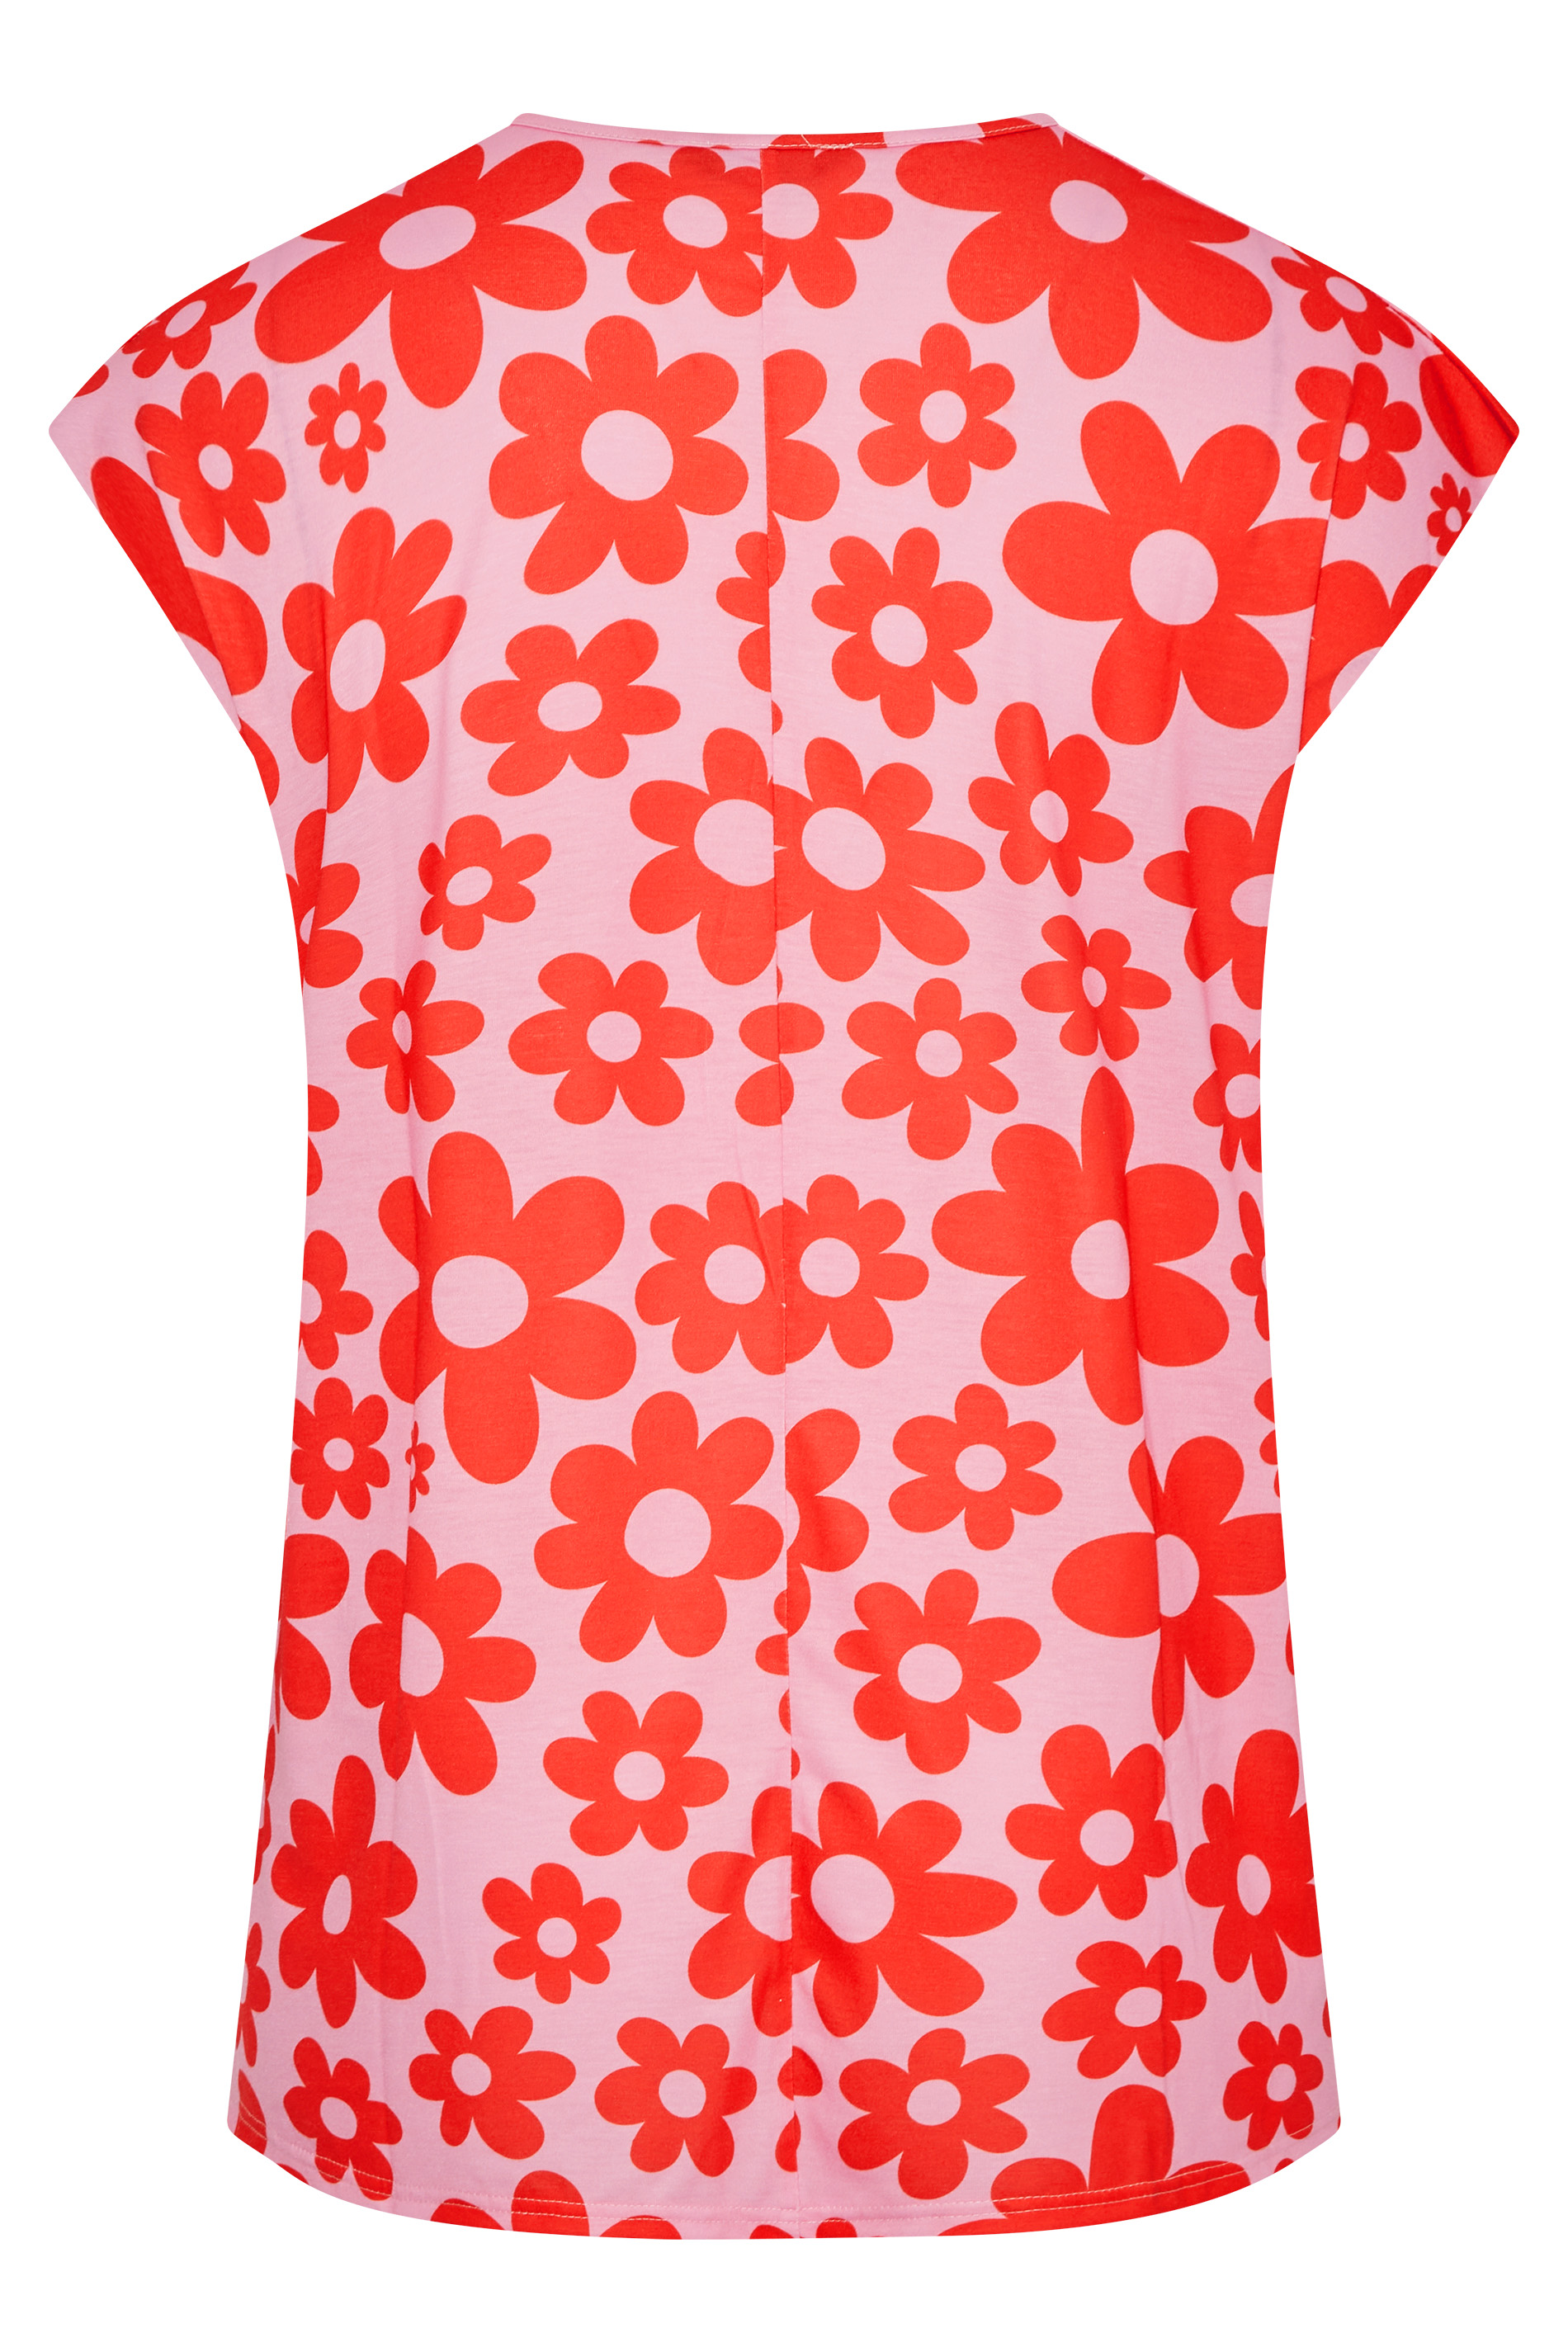 Grande taille  Tops Grande taille  Tops Jersey | LIMITED COLLECTION - T-Shirt Rétro Rose Floral Rouge - RJ23503